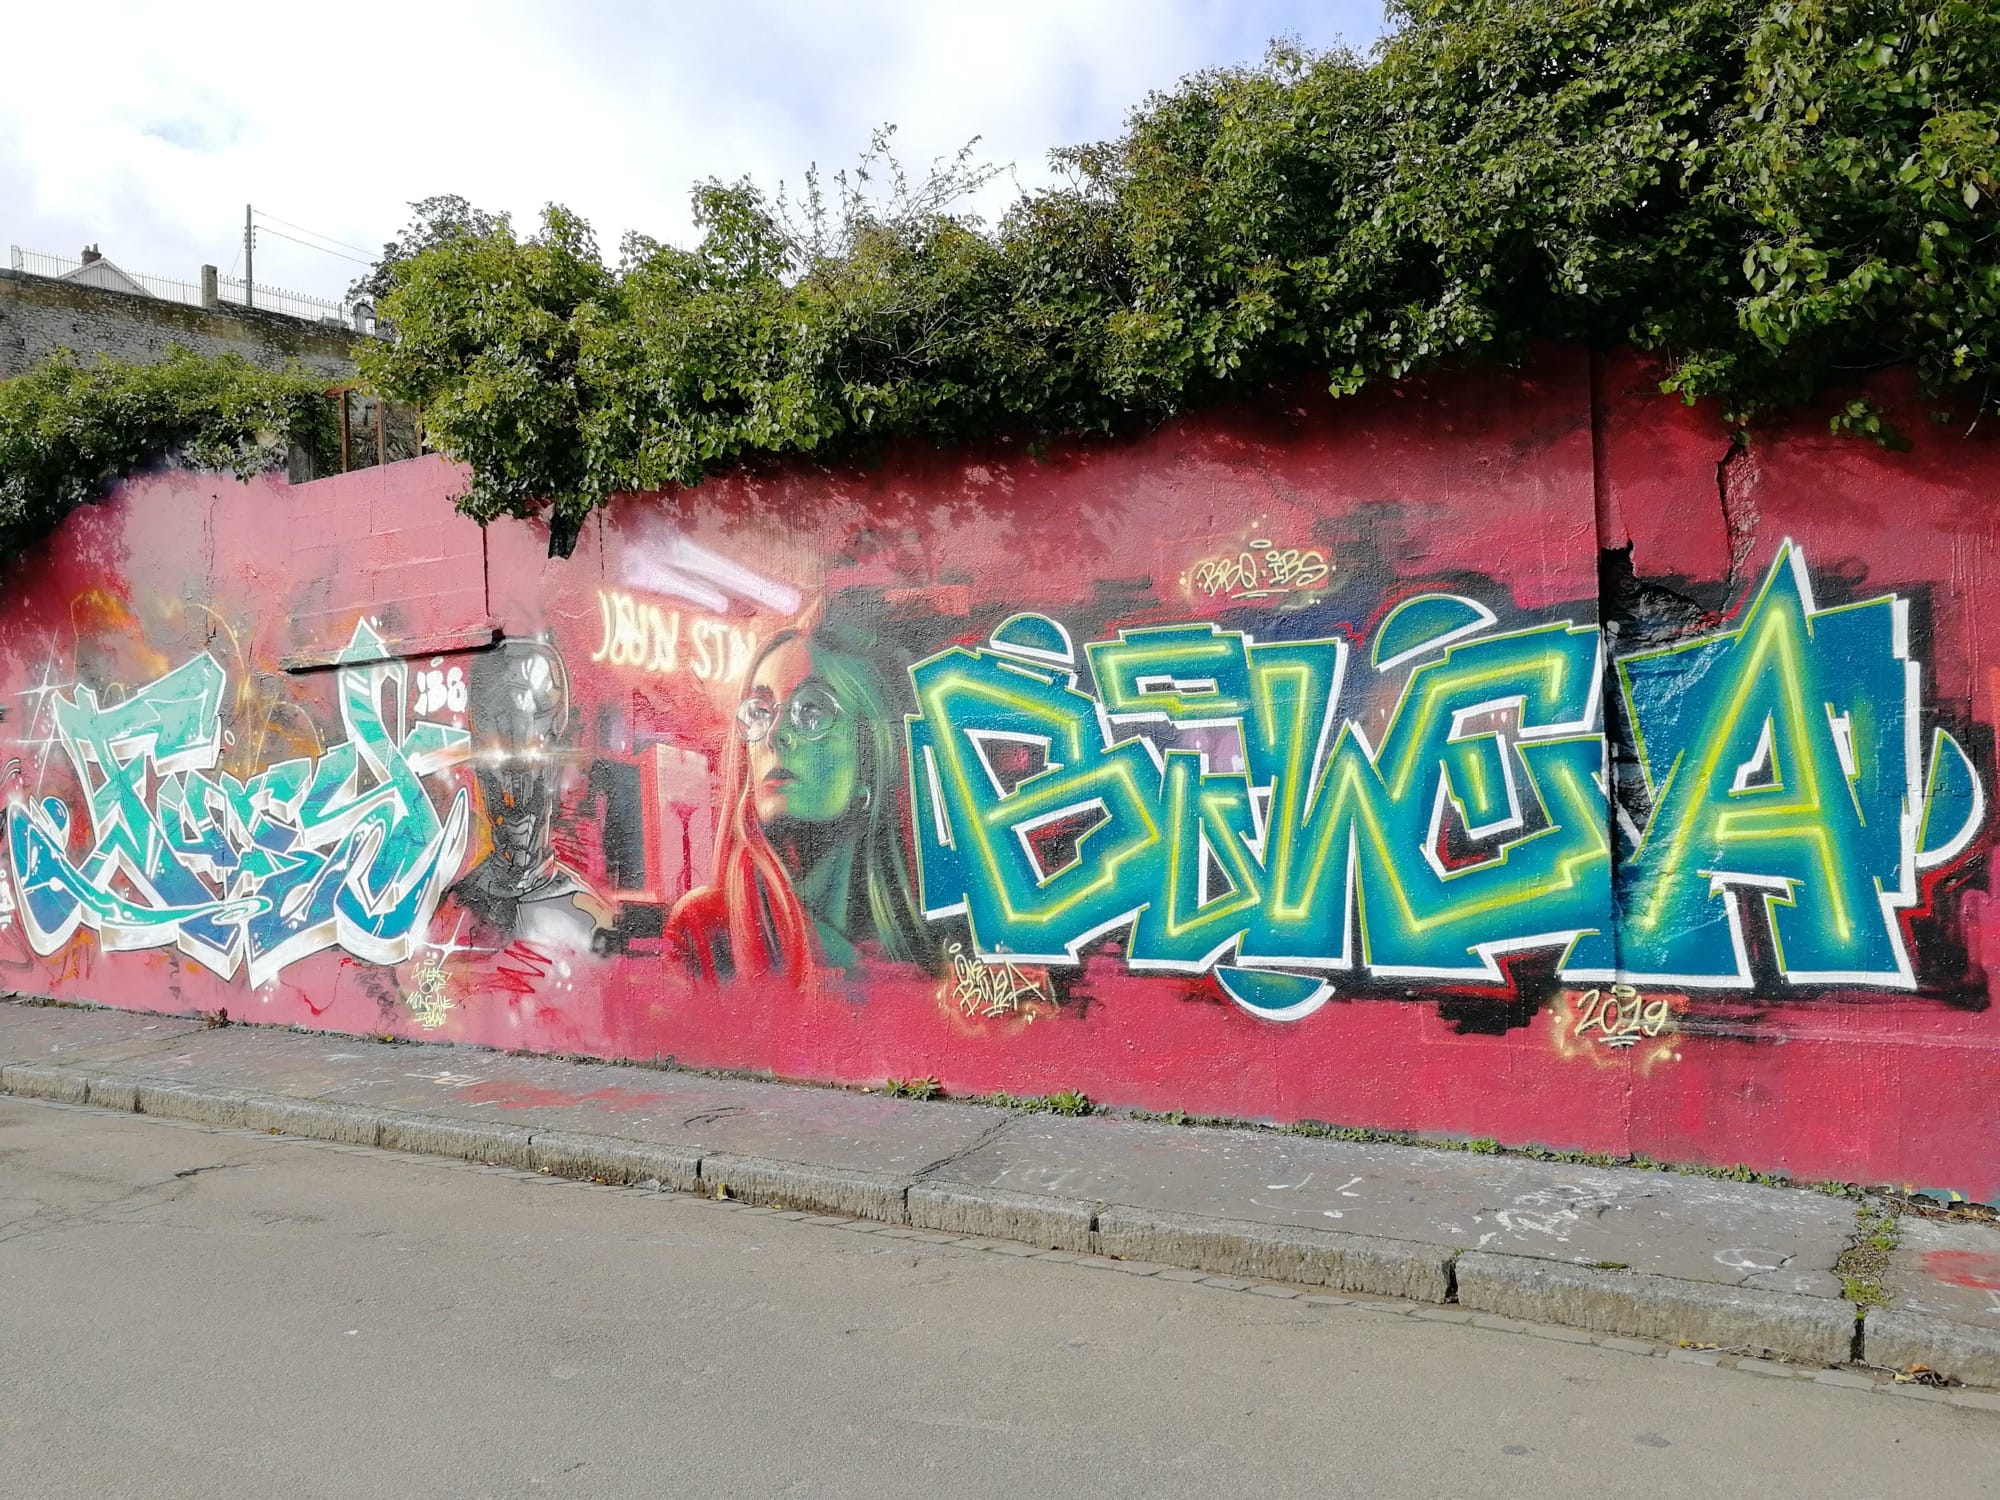 Graffiti 1133  captured by Rabot in Nantes France